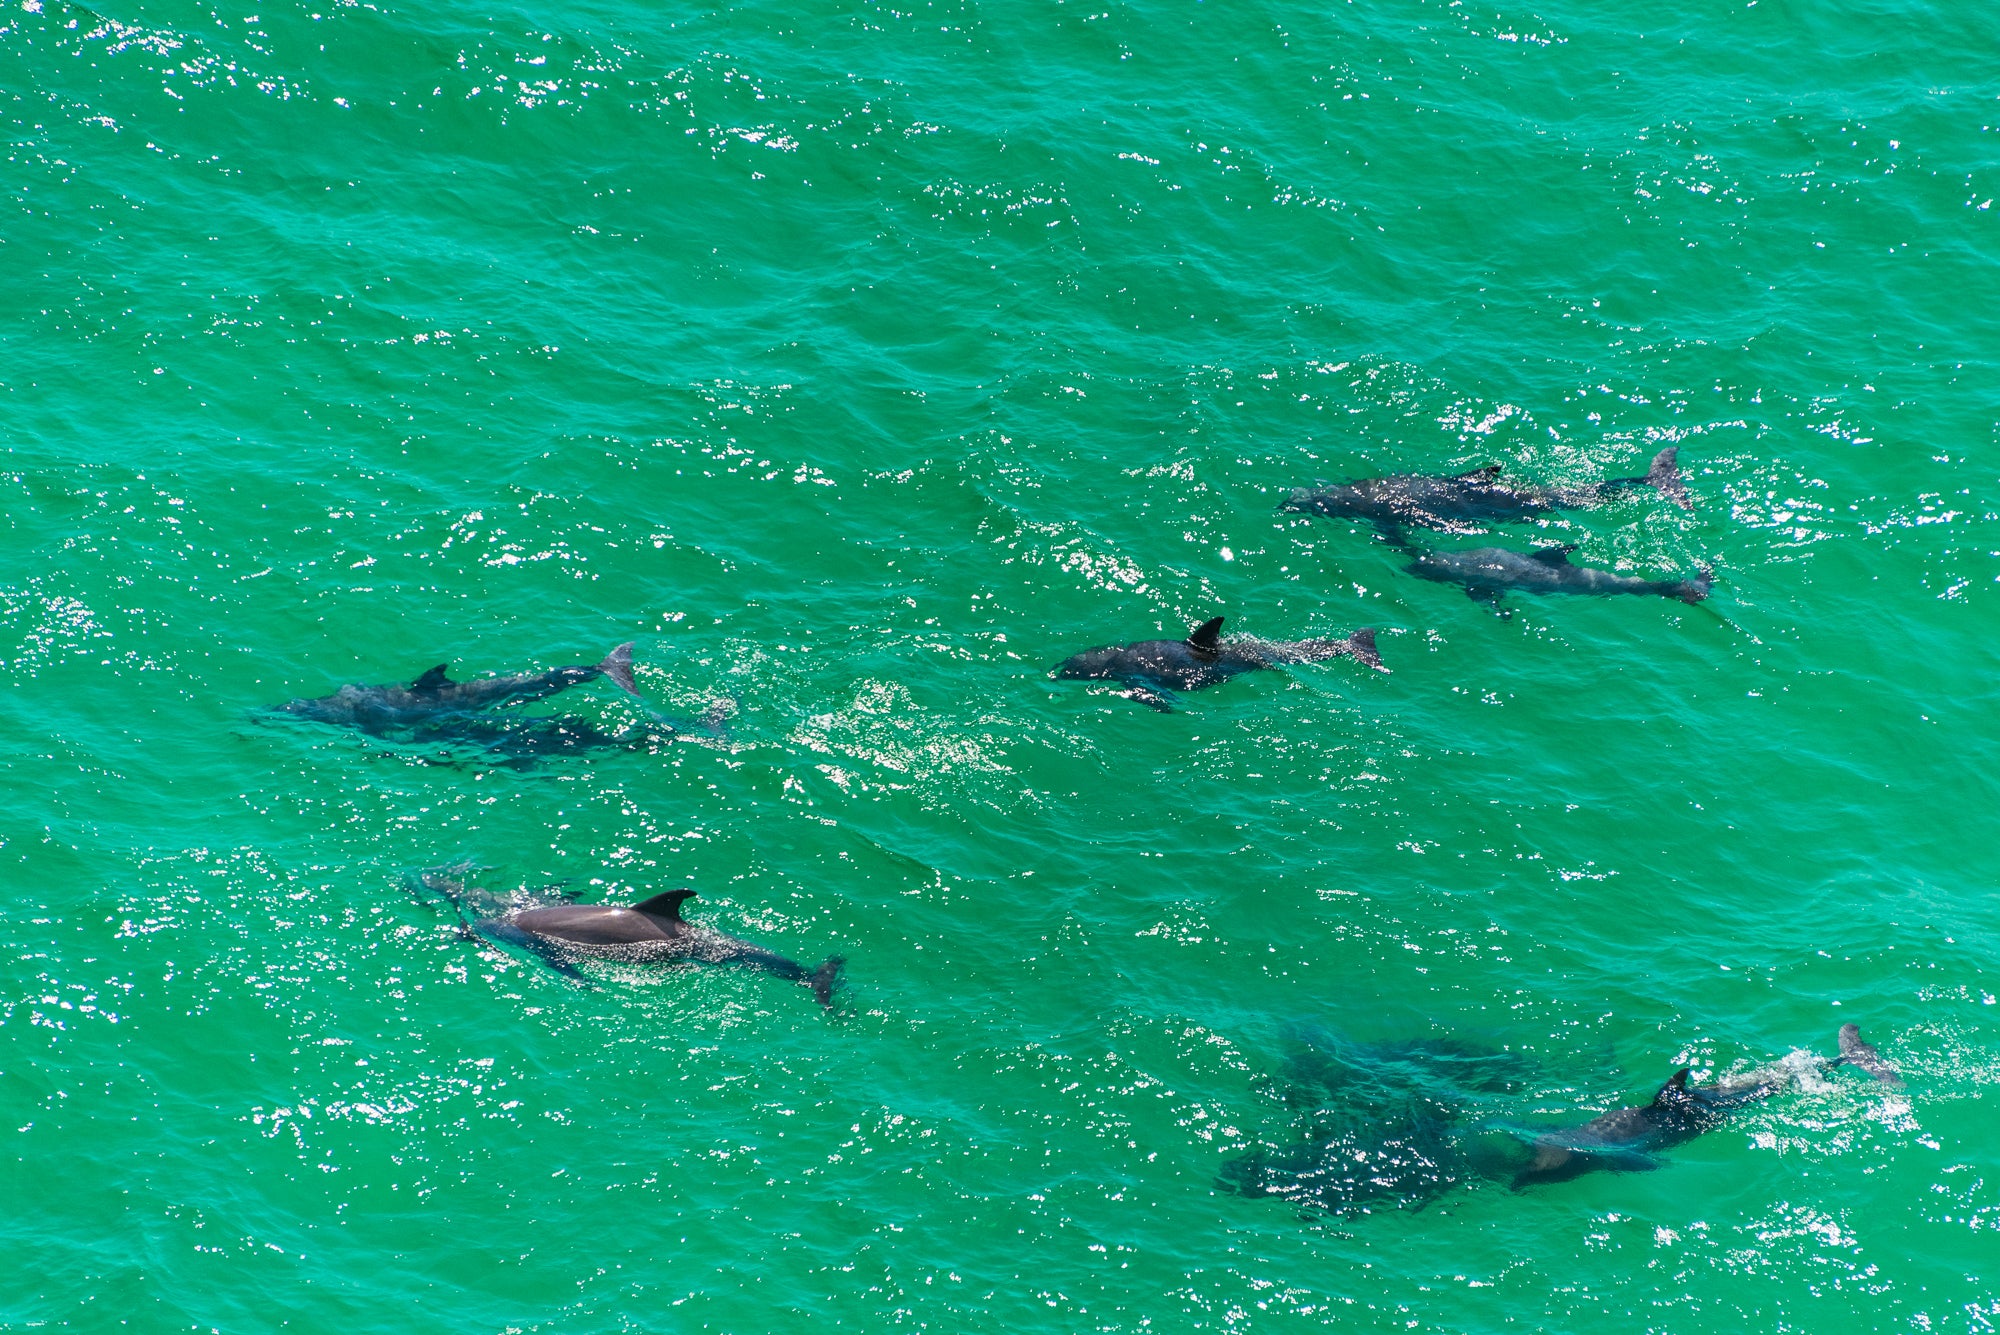 Dolphins at play in the Emerald Waters 